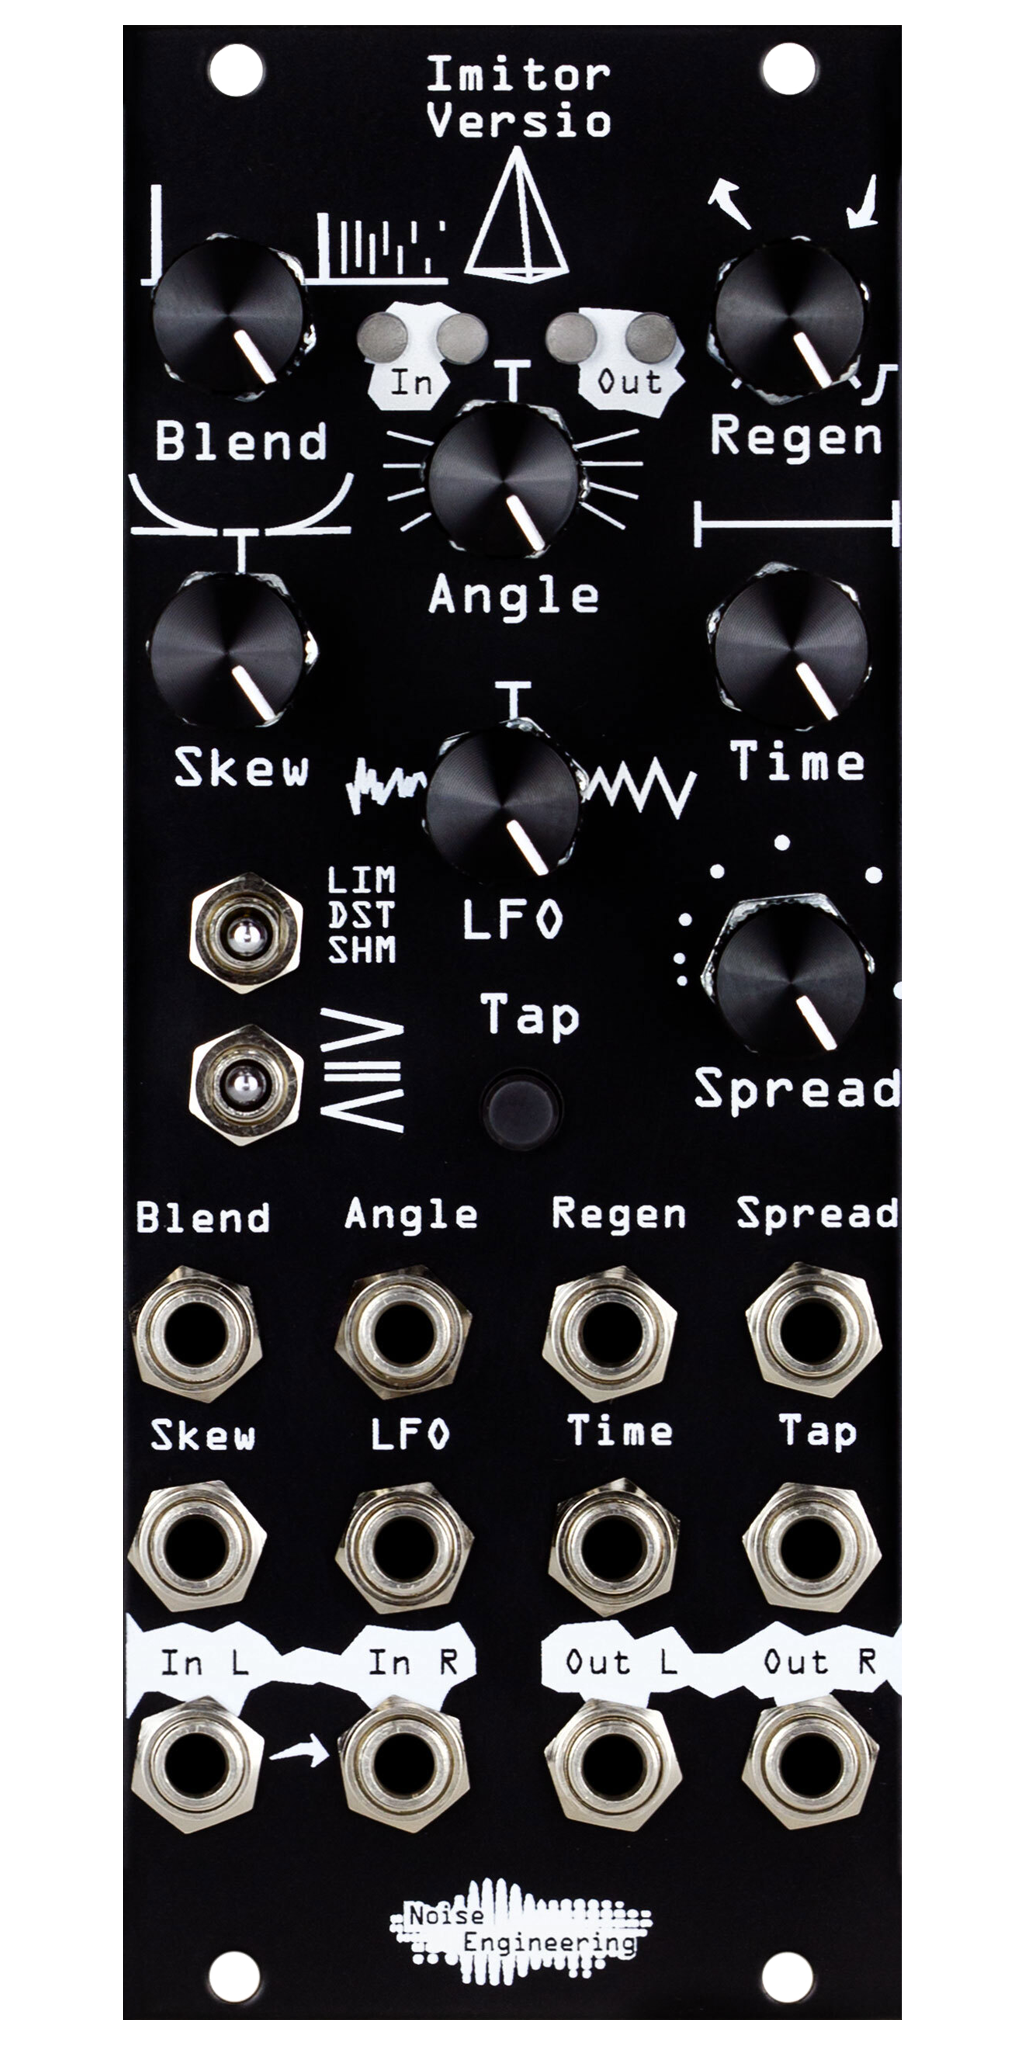 Stereo-in, stereo-out 12-tap multimode delay with clock sync and tap tempo plus DSP platform for Eurorack in black | Imitor Versio by Noise Engineering